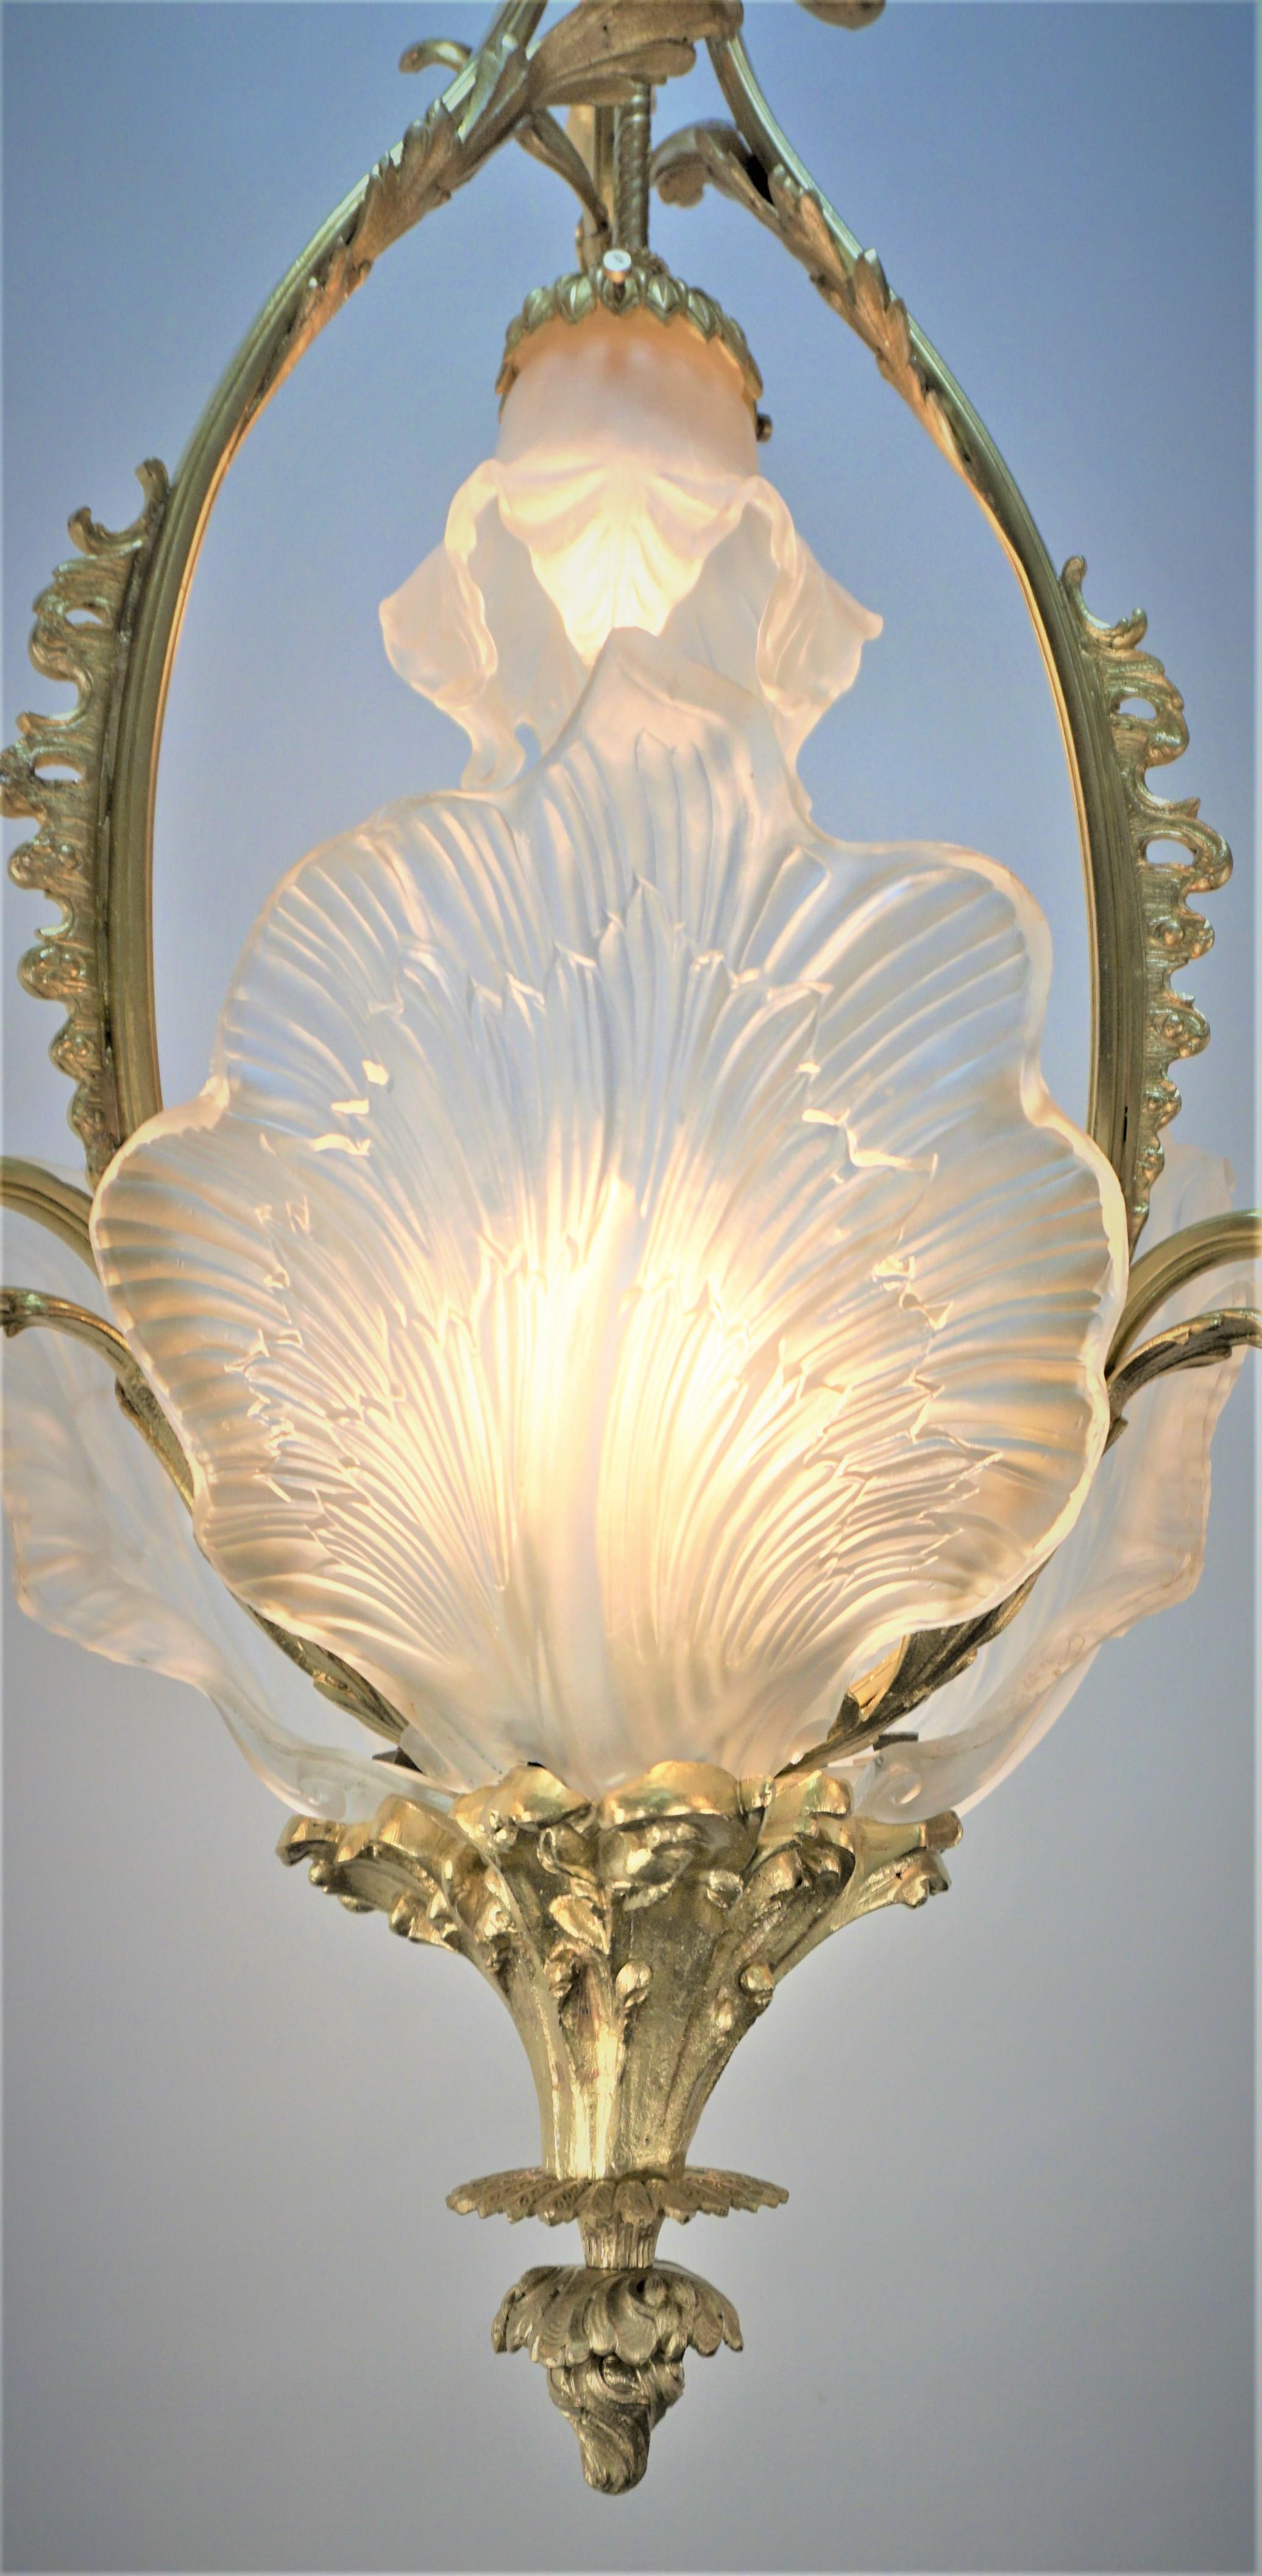 Elegant bronze chandelier with hand blown glass flora design and three panel molded leaf center shades.